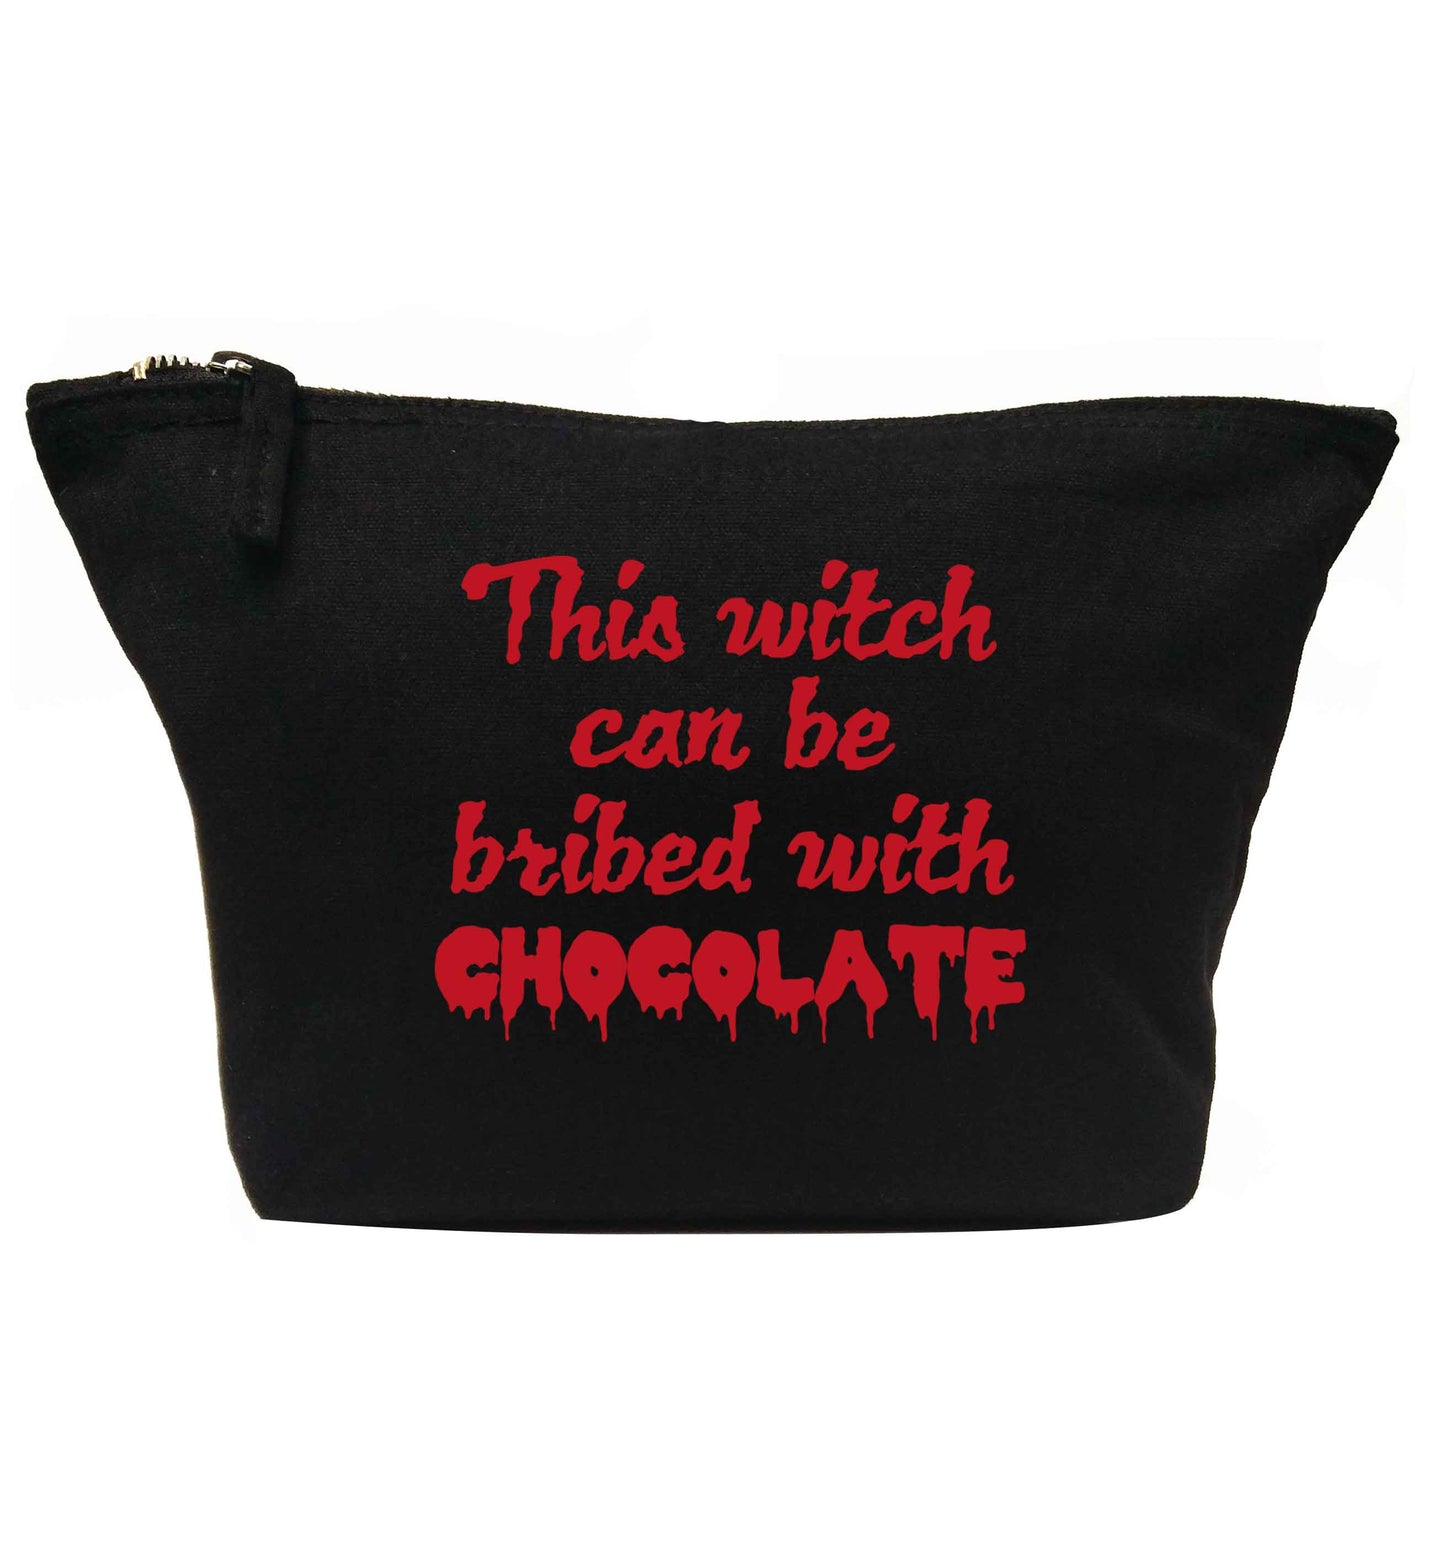 This witch can be bribed with chocolate | Makeup / wash bag